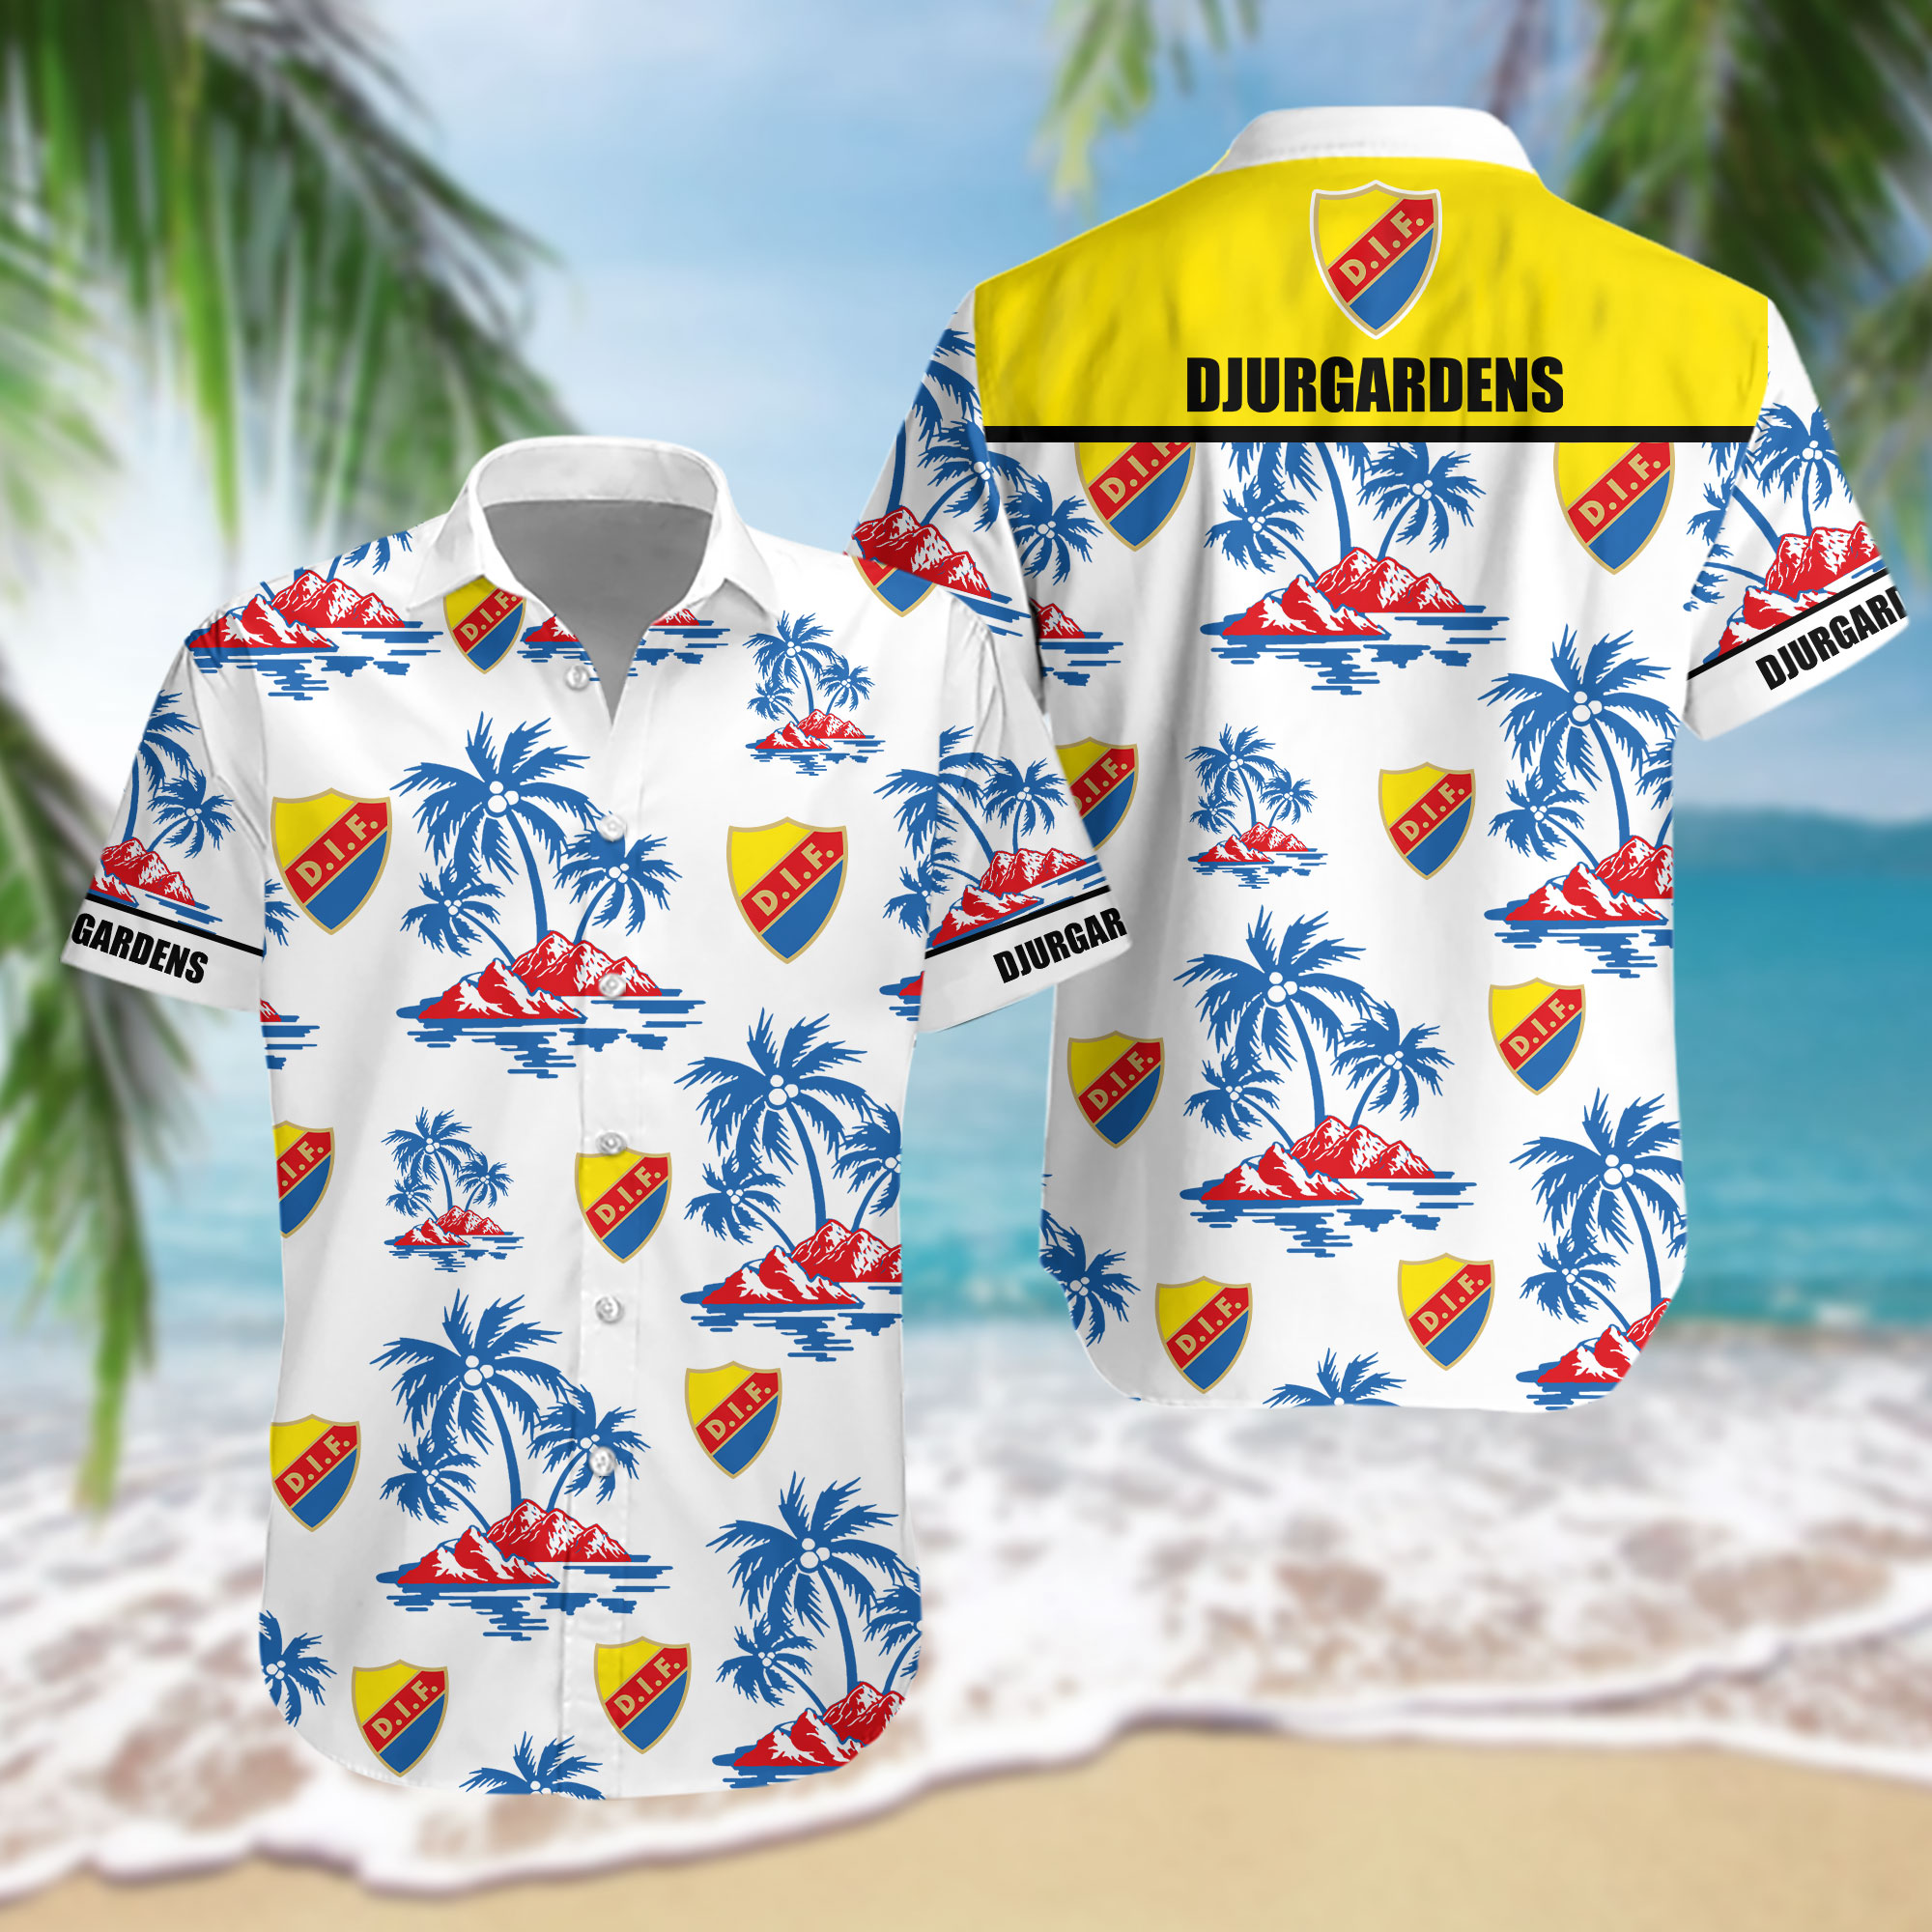 These Hawaiian Shirt will be a great choice for any type of occasion 21